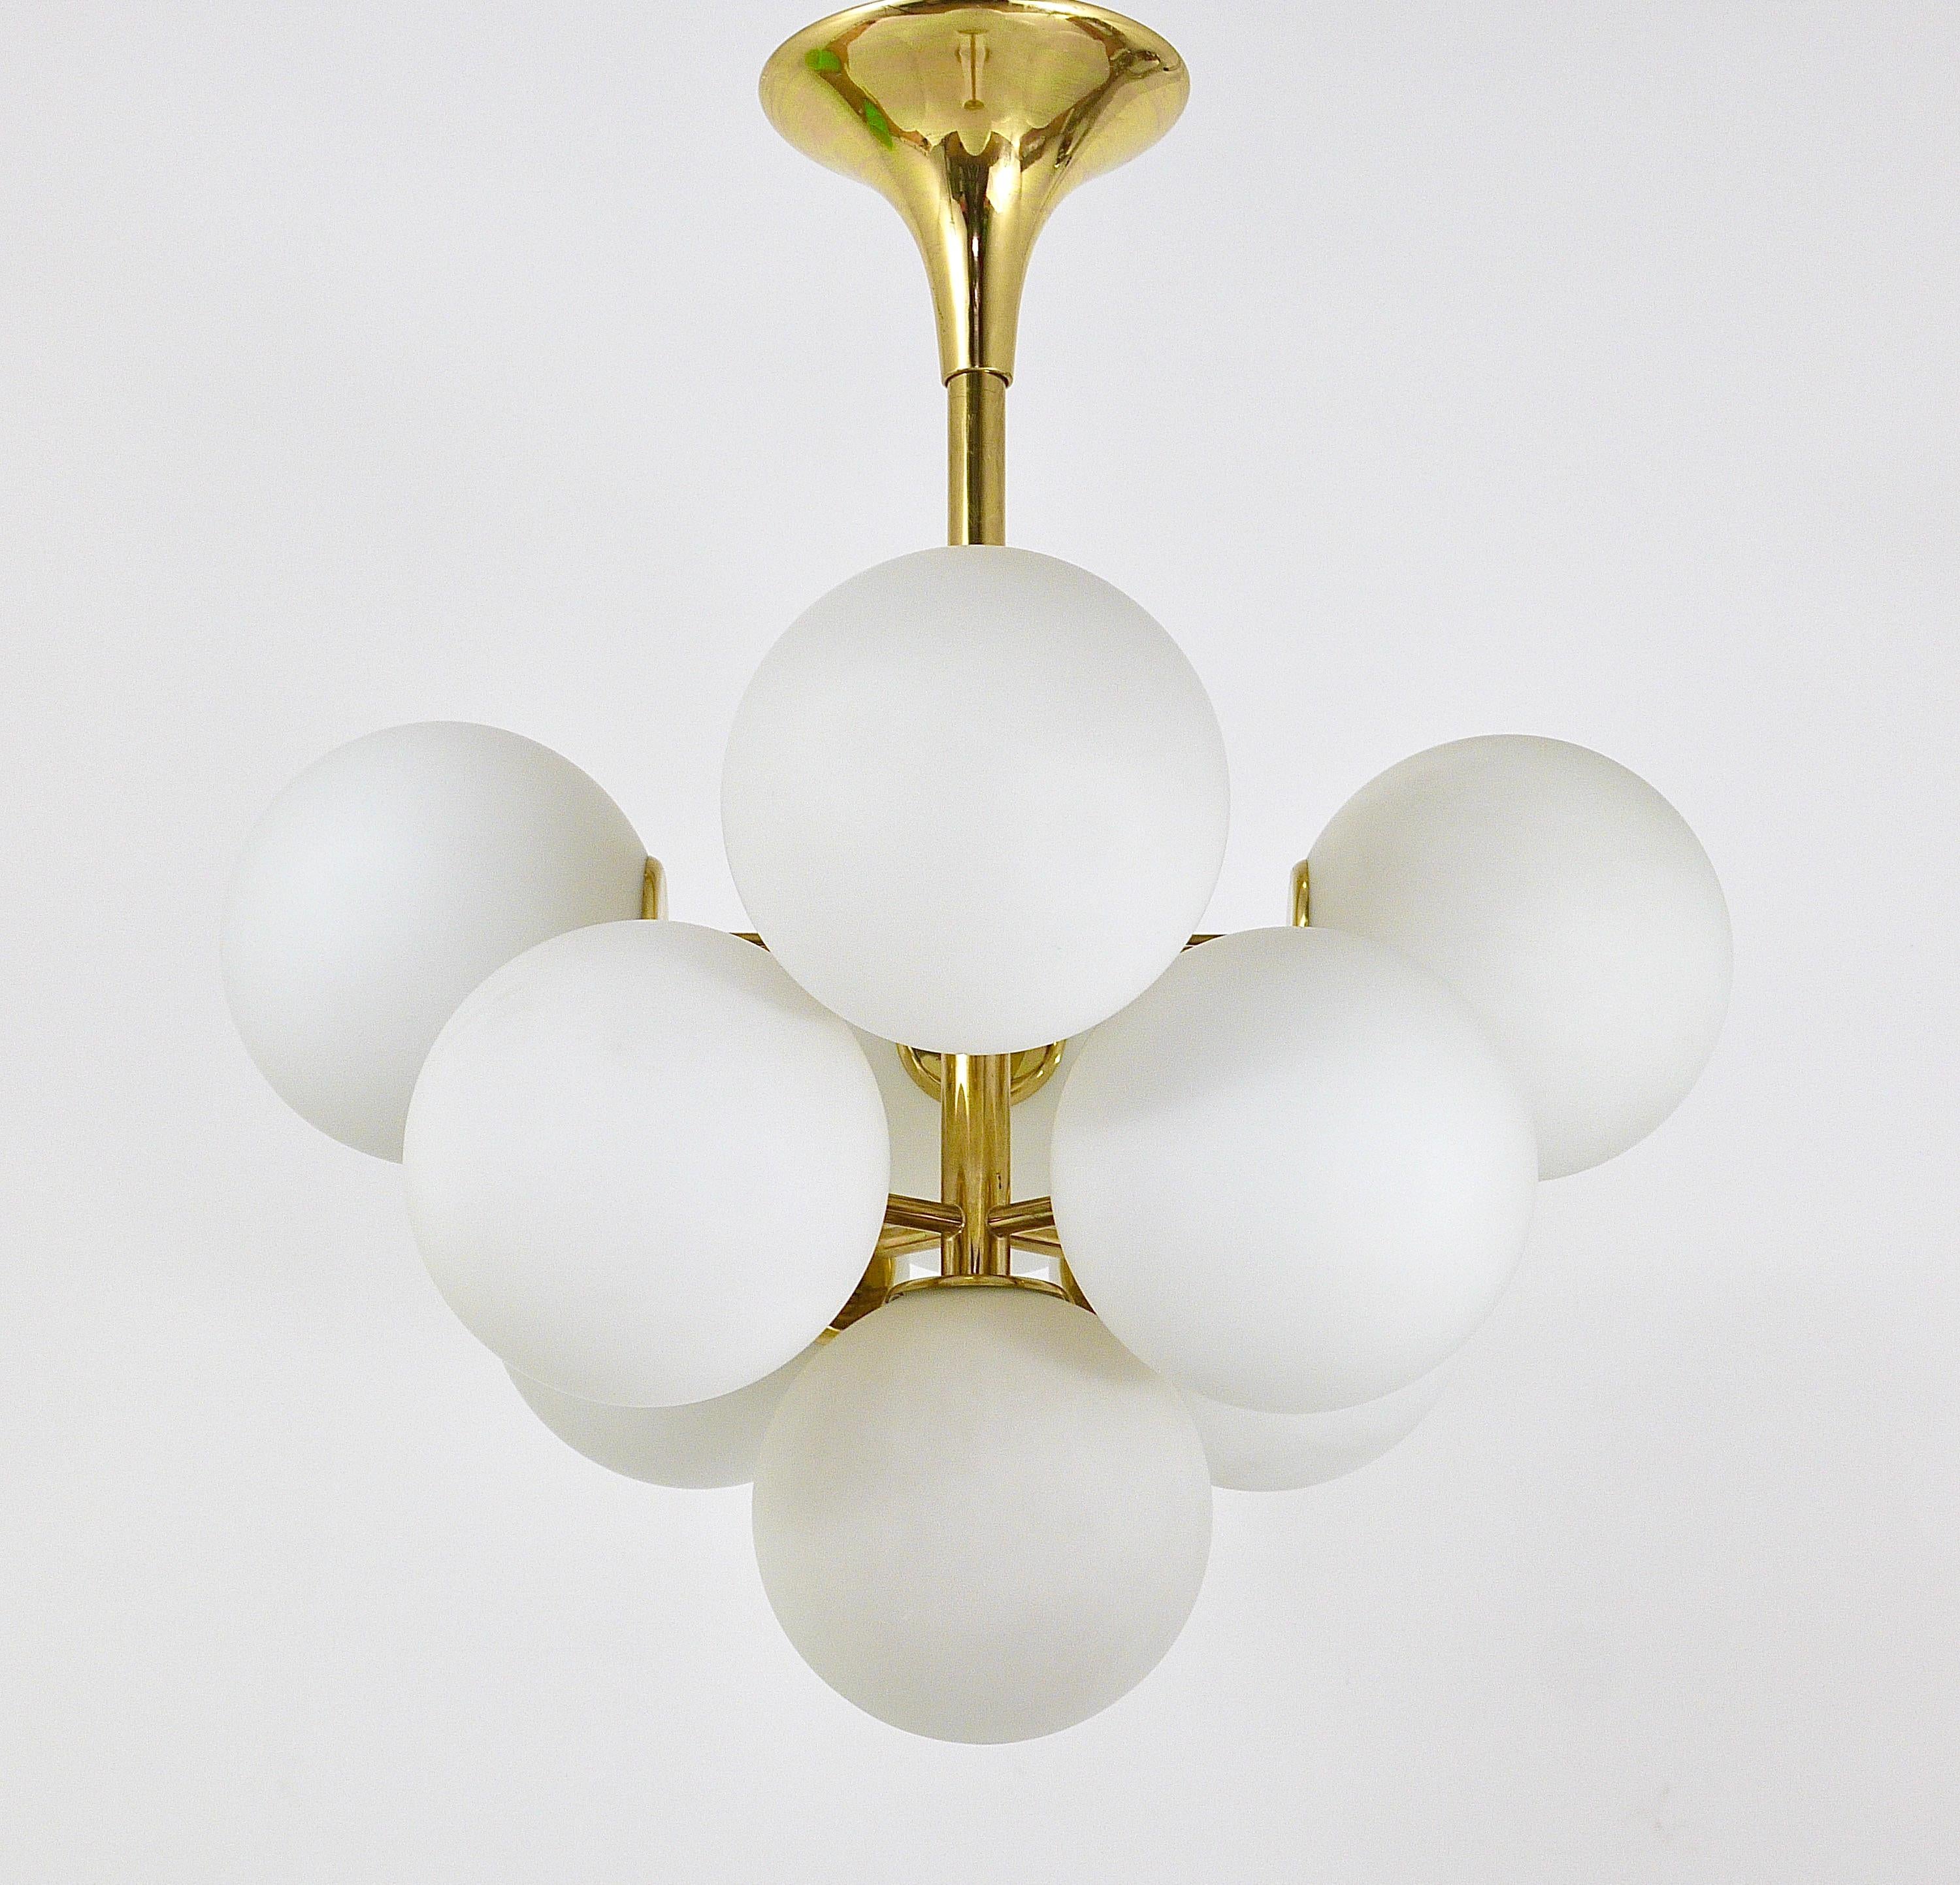 Milk Glass Atomic Brass Chandelier, White Glass Globes, in the style of E. R. Nele by Temde